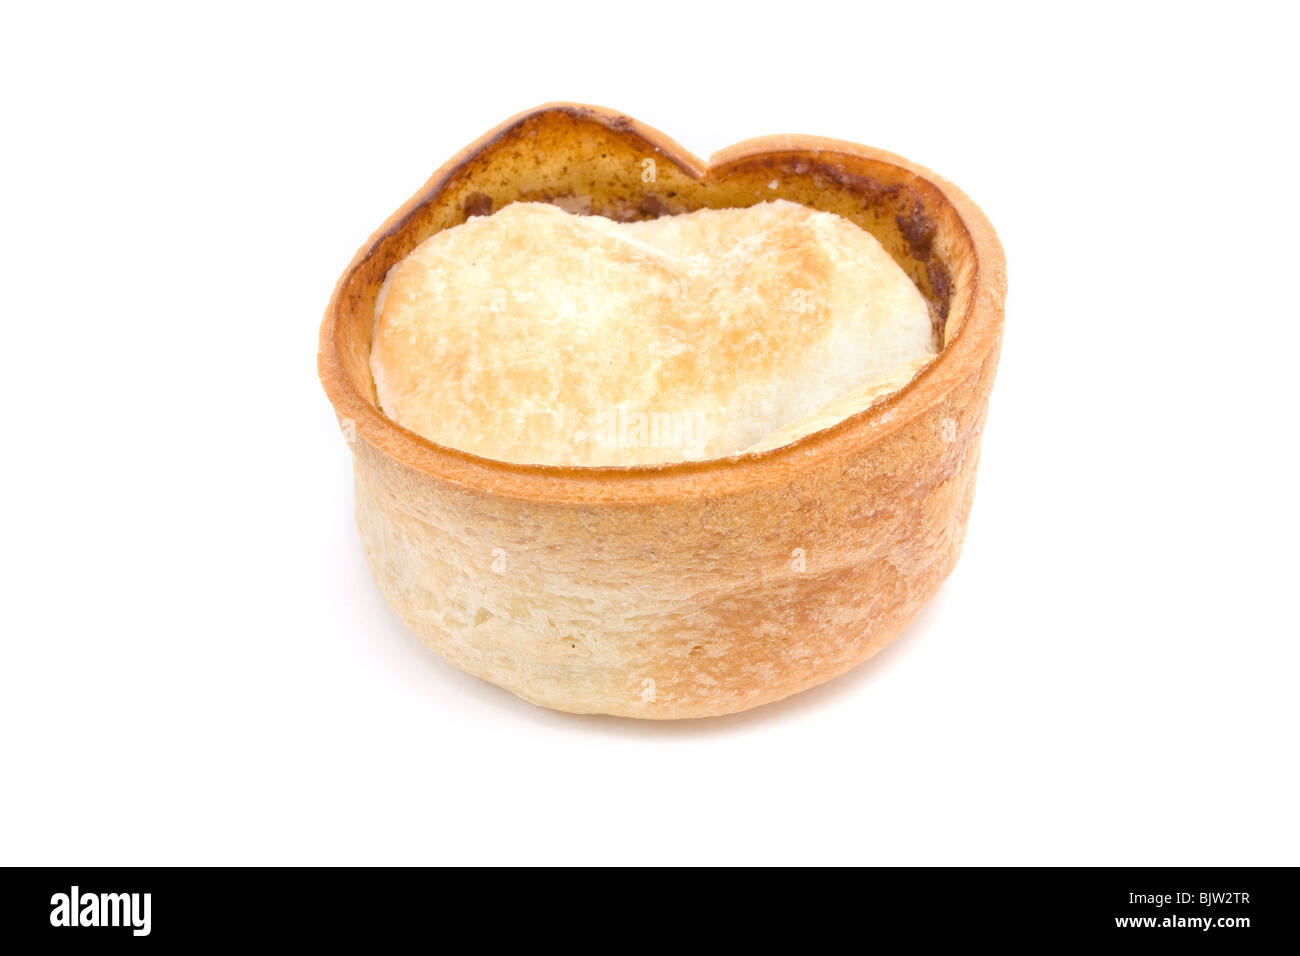 Small round scottish style Steak and Gravy Pie isolated against white background. Stock Photo